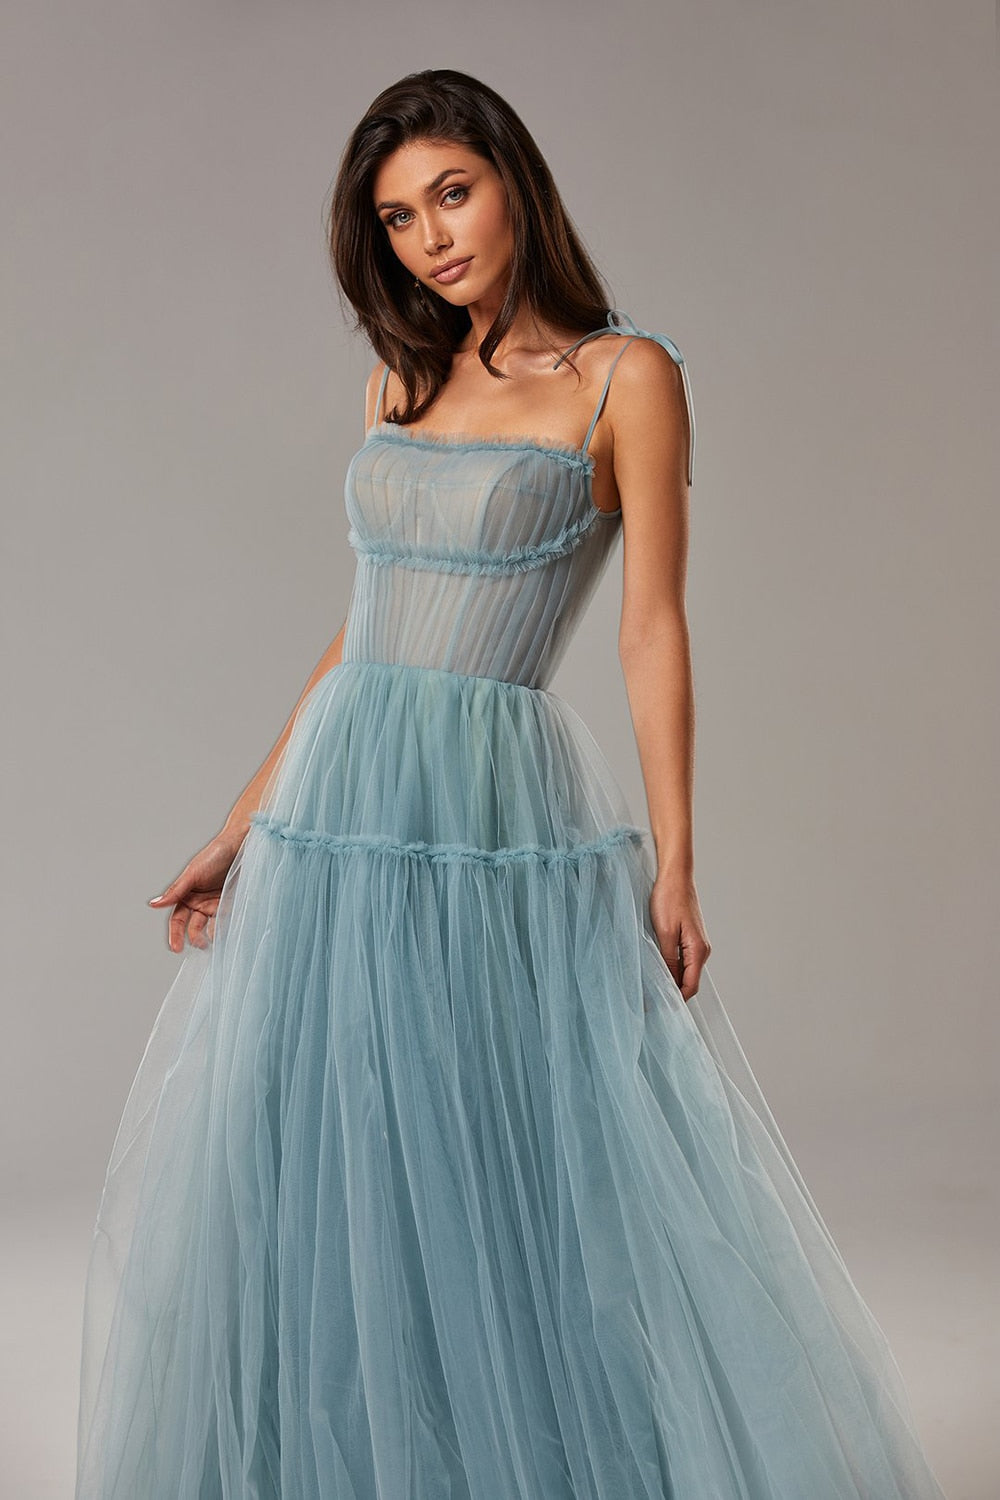 Blush Pink/Blue Long Prom Dresses Spaghetti Straps Tiered Skirt A-Line Party Dresses Ple